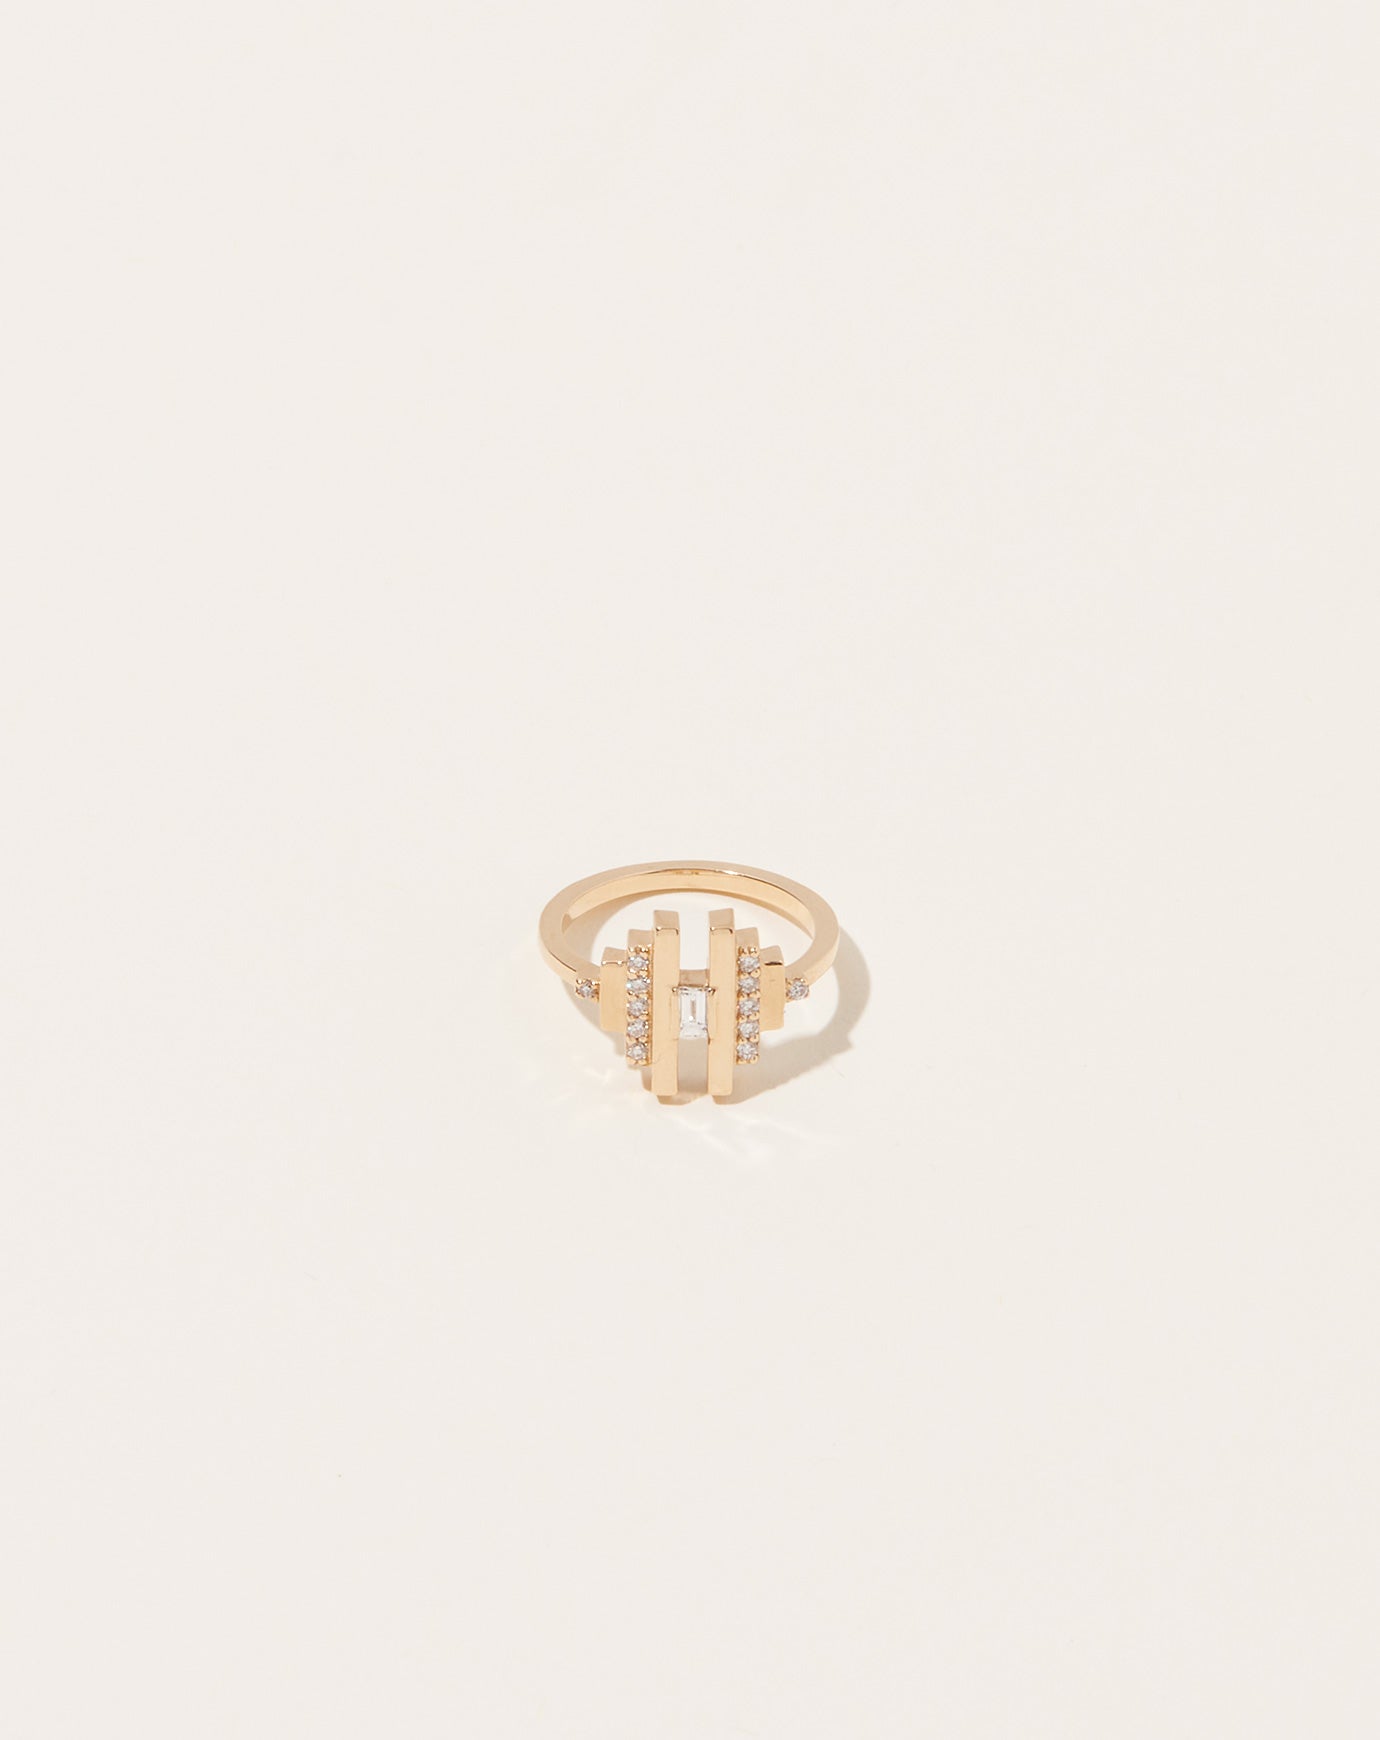 Selin Kent Cicim Pave Pinky Ring with Diamonds in 14k Yellow Gold